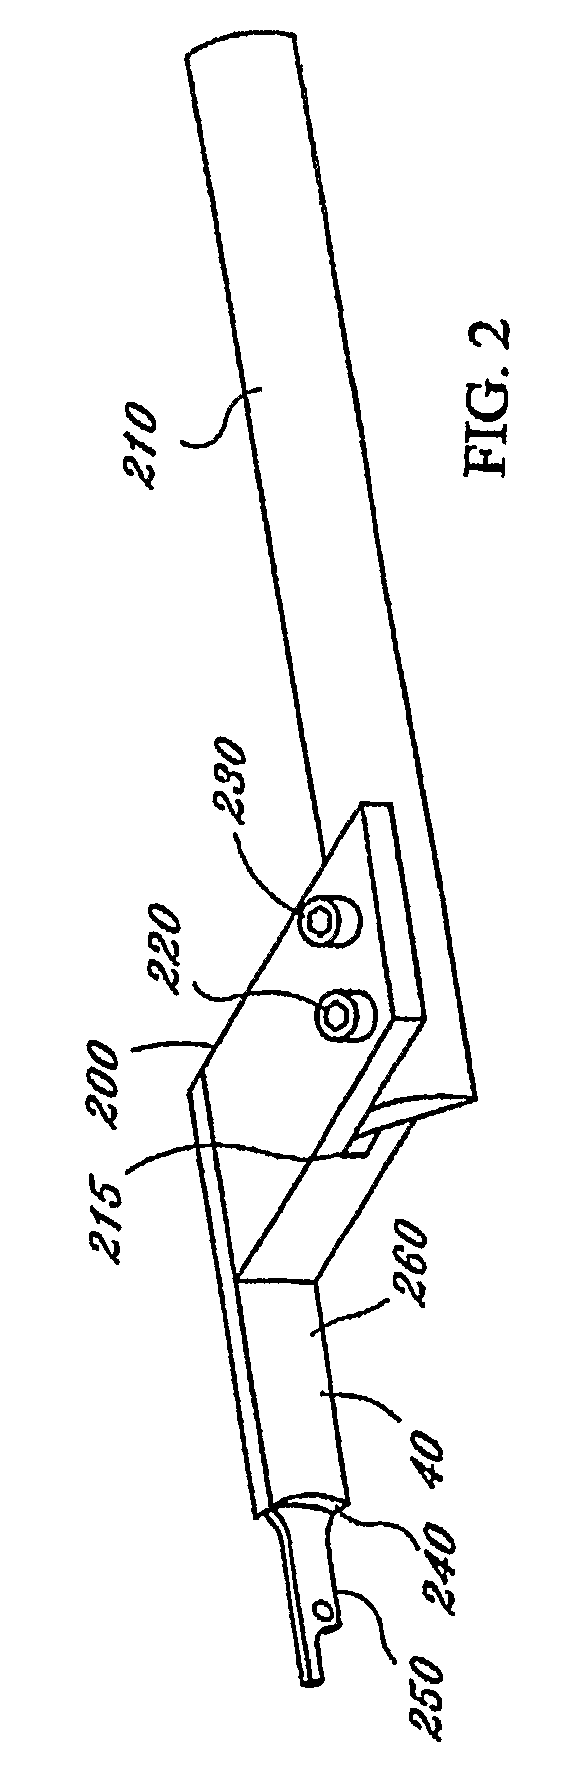 Reciprocating Saw and Attachments